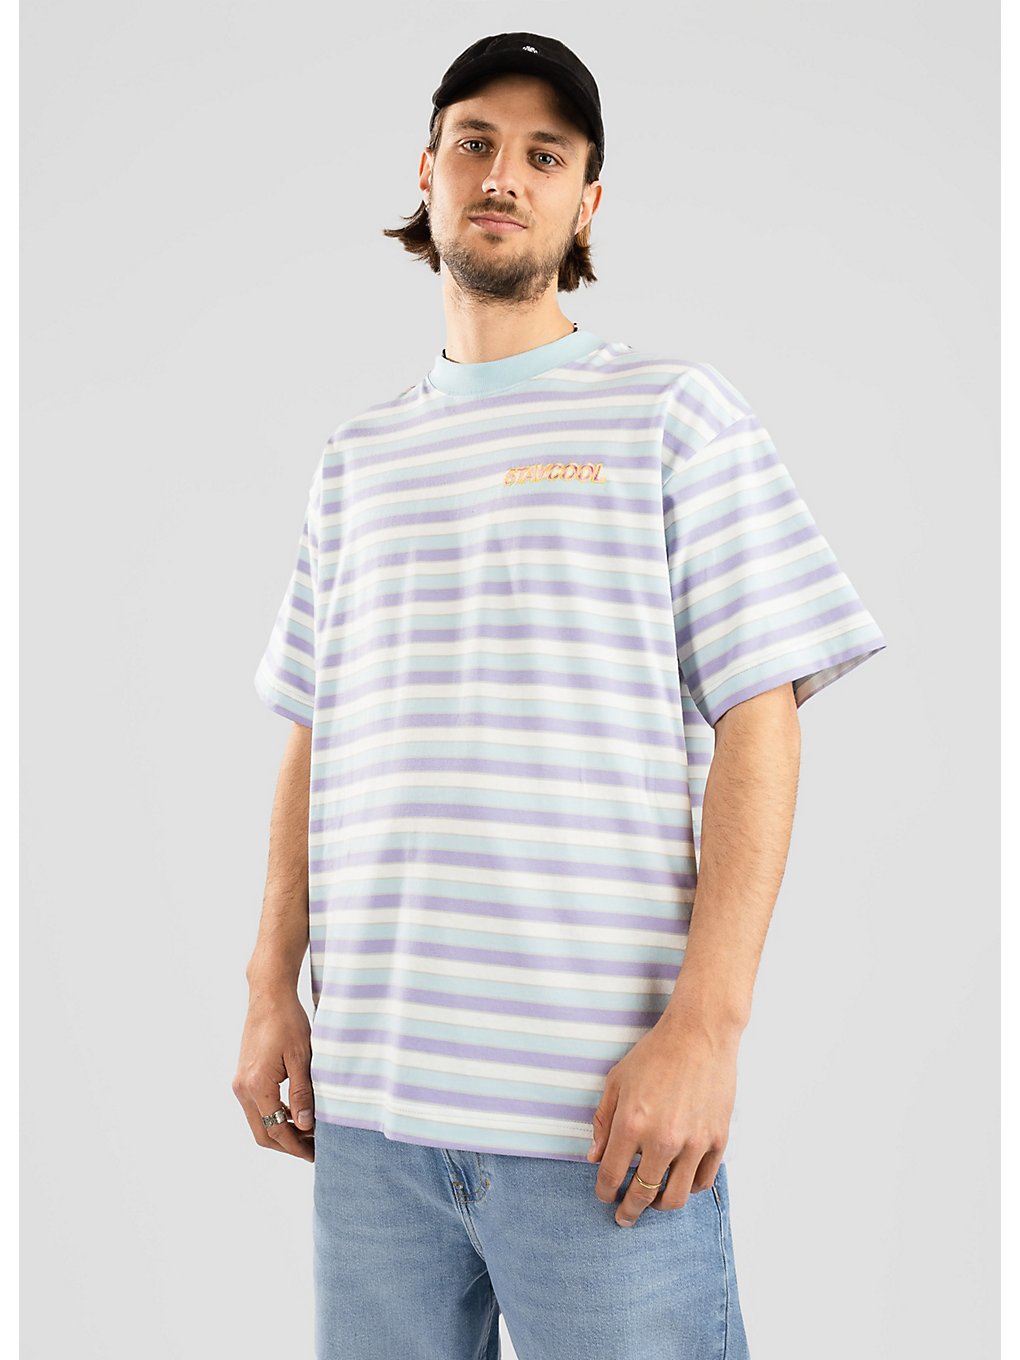 Staycoolnyc Blueberry Striped T-Shirt patroon